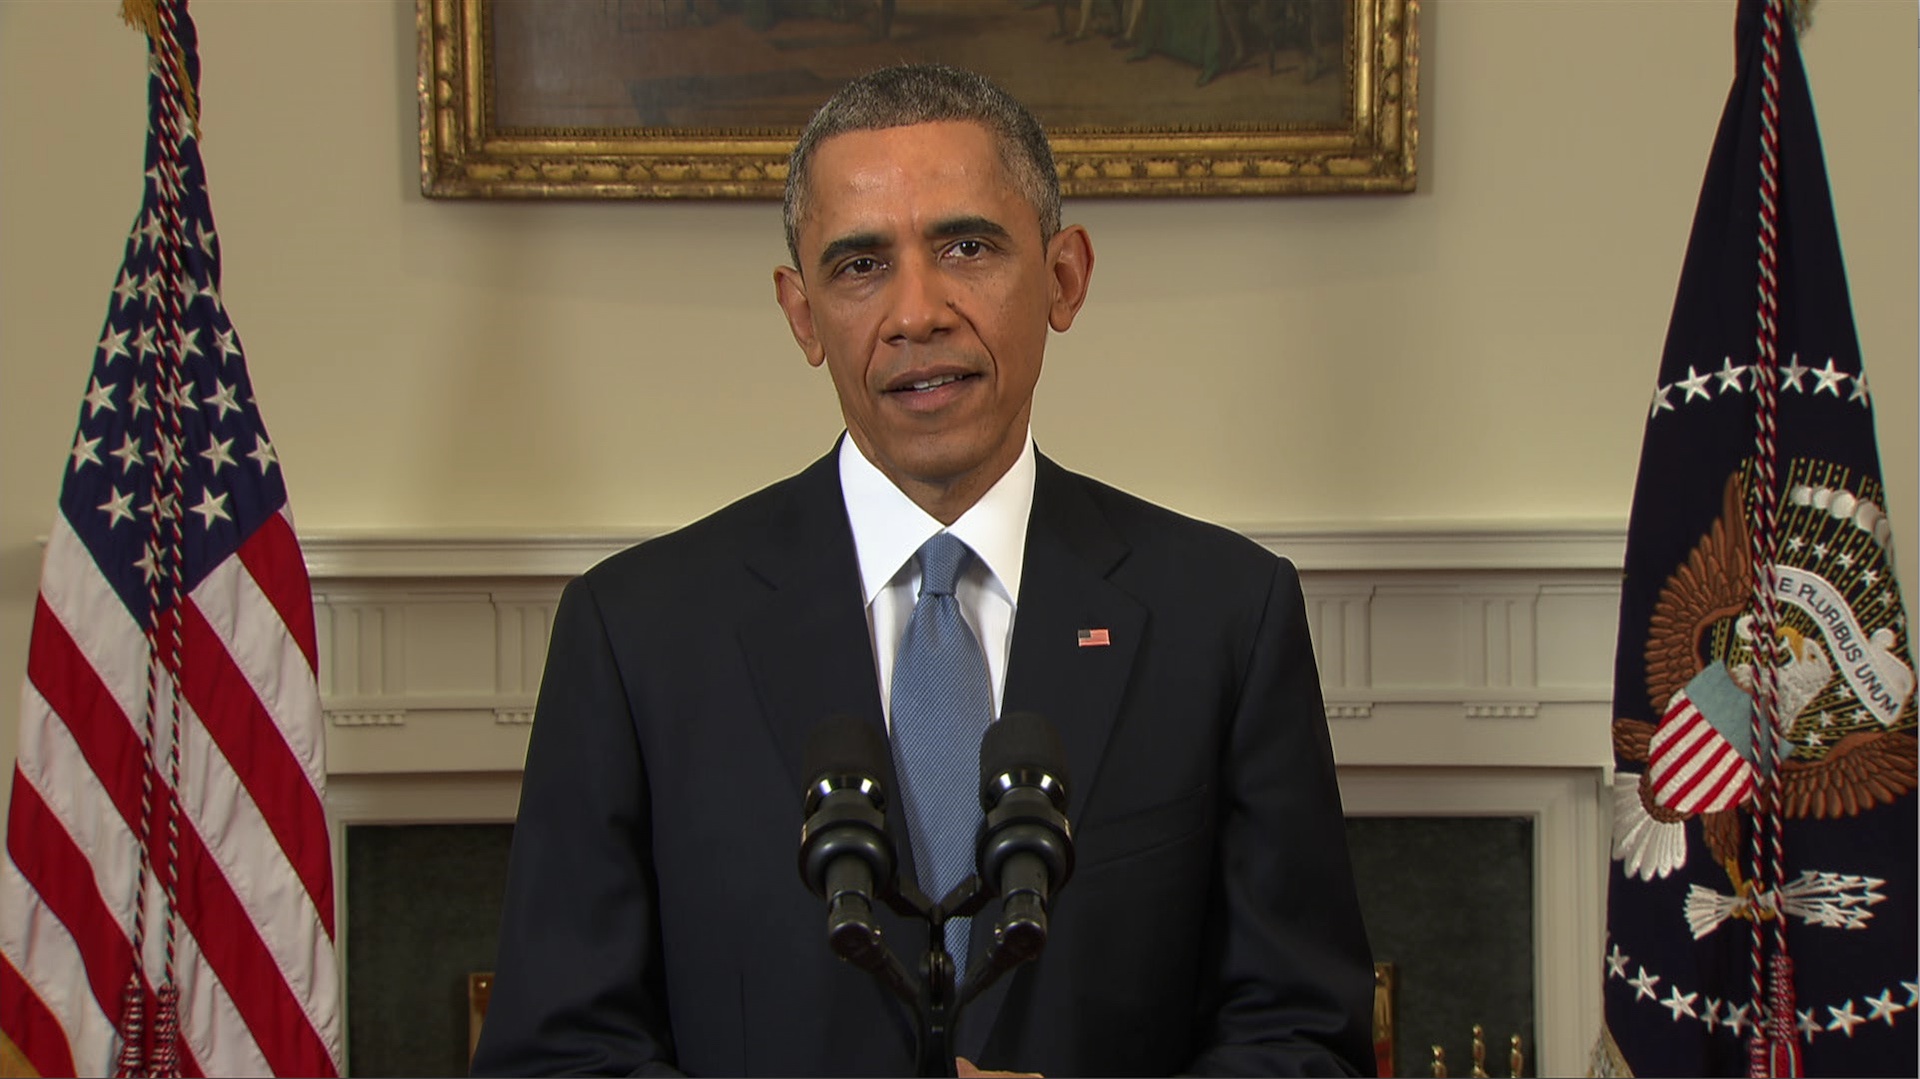 Obama: Cuba Sanctions Not to Be Lifted Soon